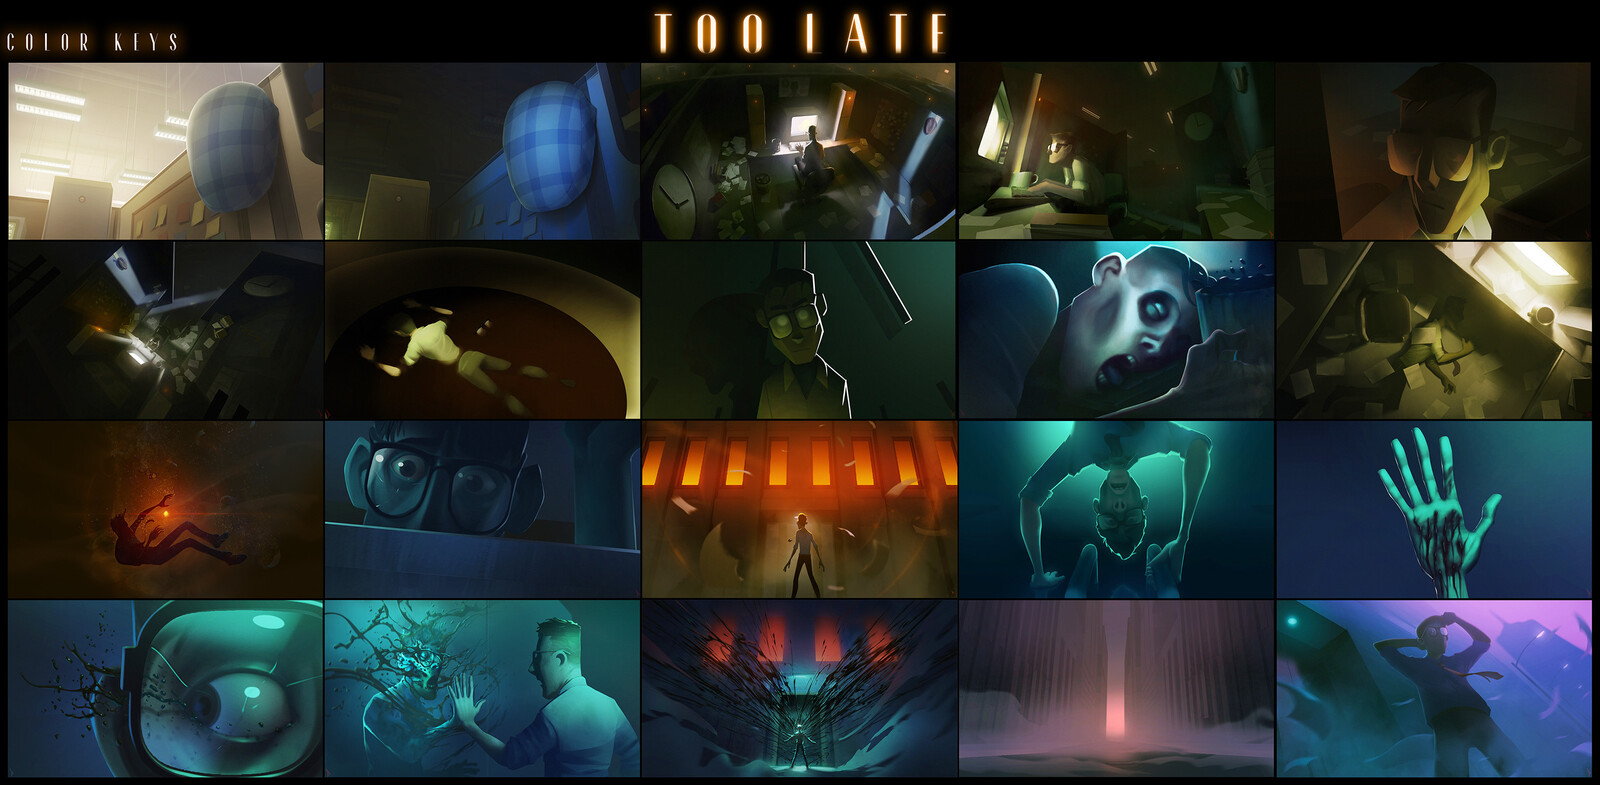 Original color keys for the film. Some were created before any cg work began, and a couple after some greybox or block-in art was made.